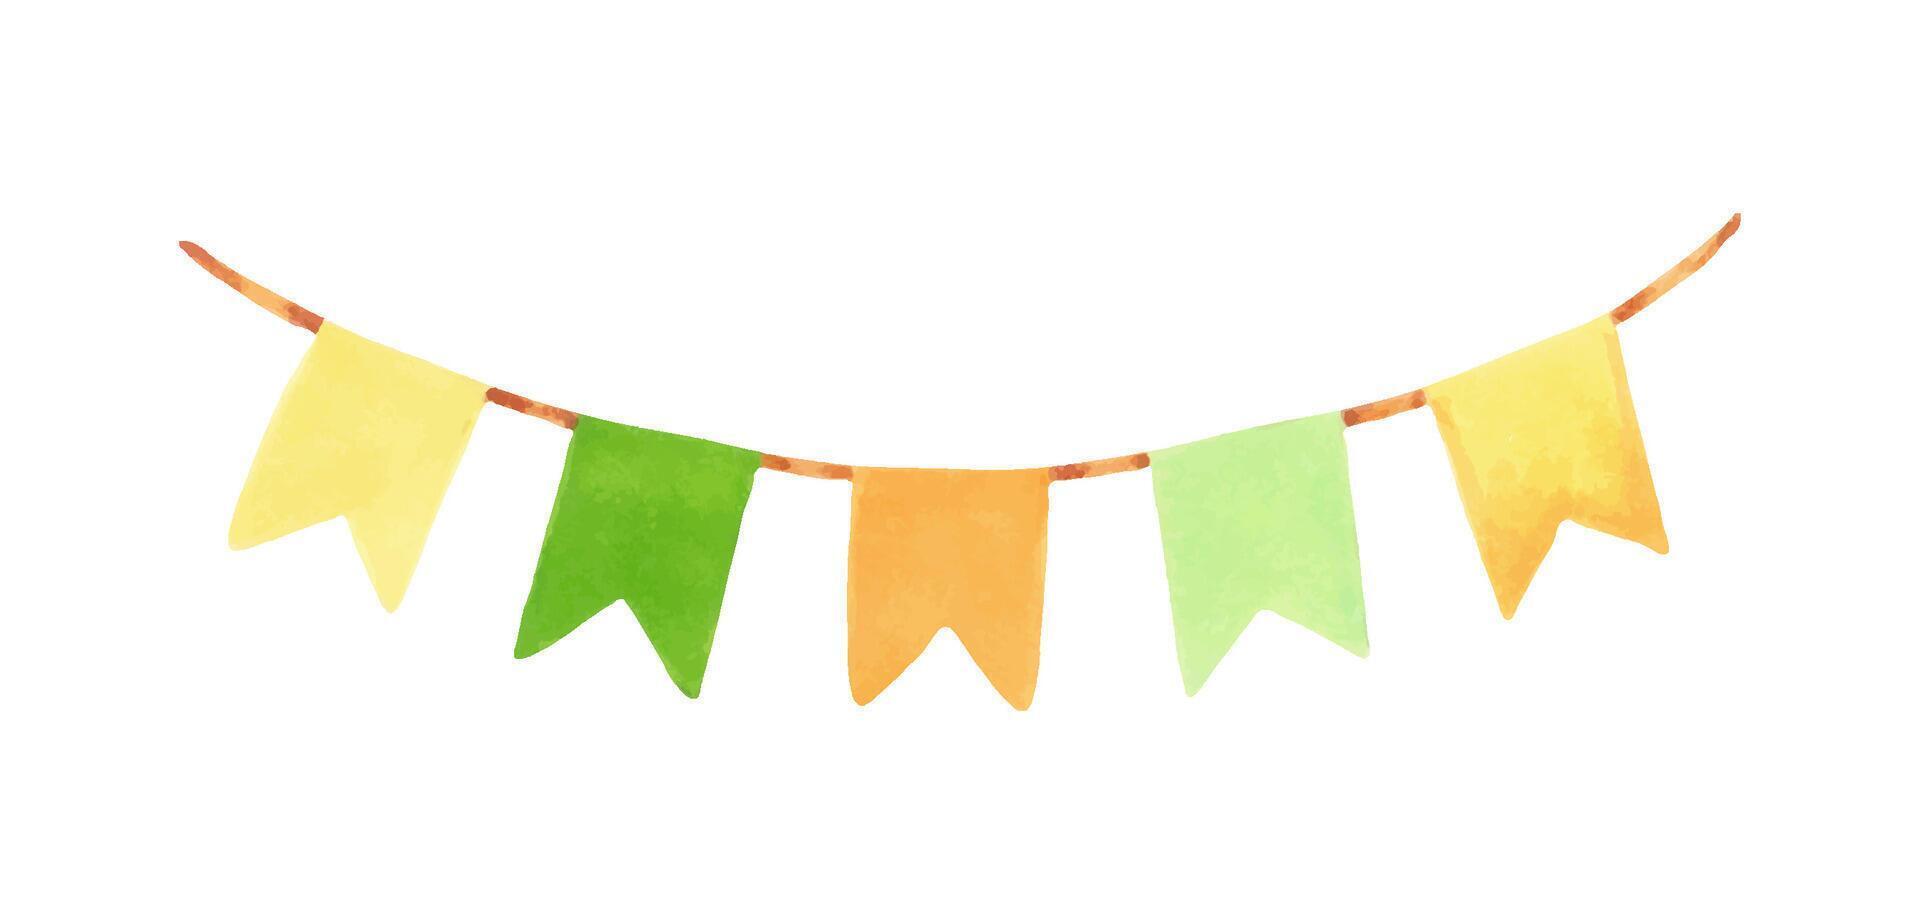 St. Patrick's Day garland.Watercolor and markers illustration.Hand drawn isolated clip art of holiday bunting.Hanging flags for holiday celebration. For design, decor, flyers, printing vector